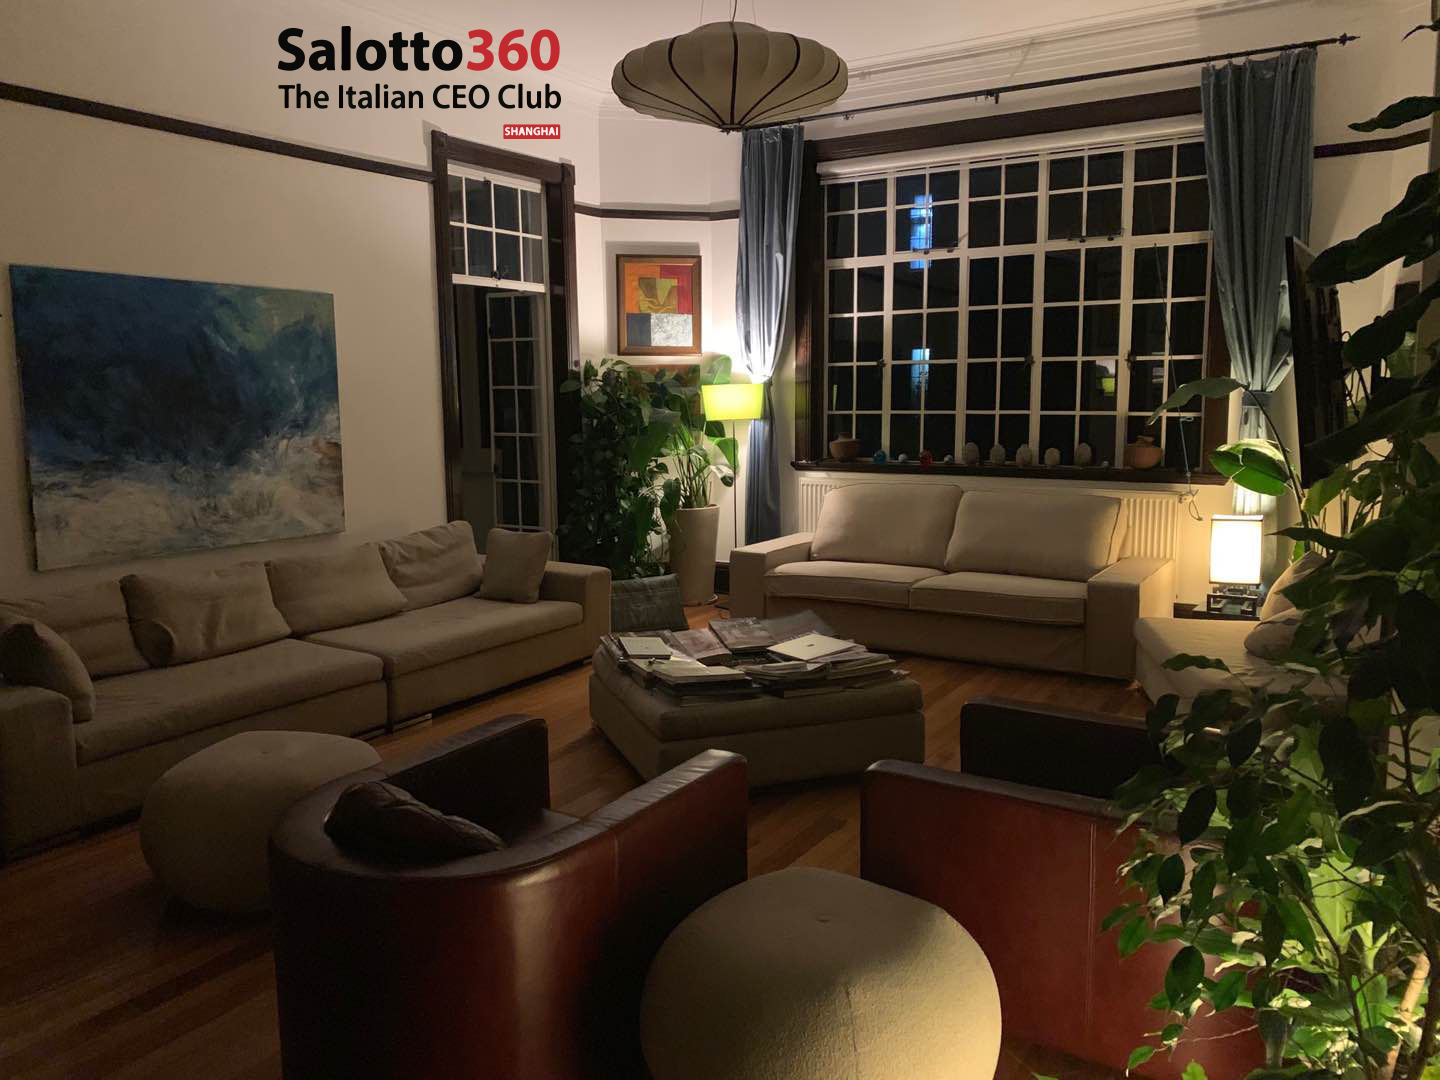 July 2019 – Barbatelli & Partners and its team organized Salotto 360’s second event.